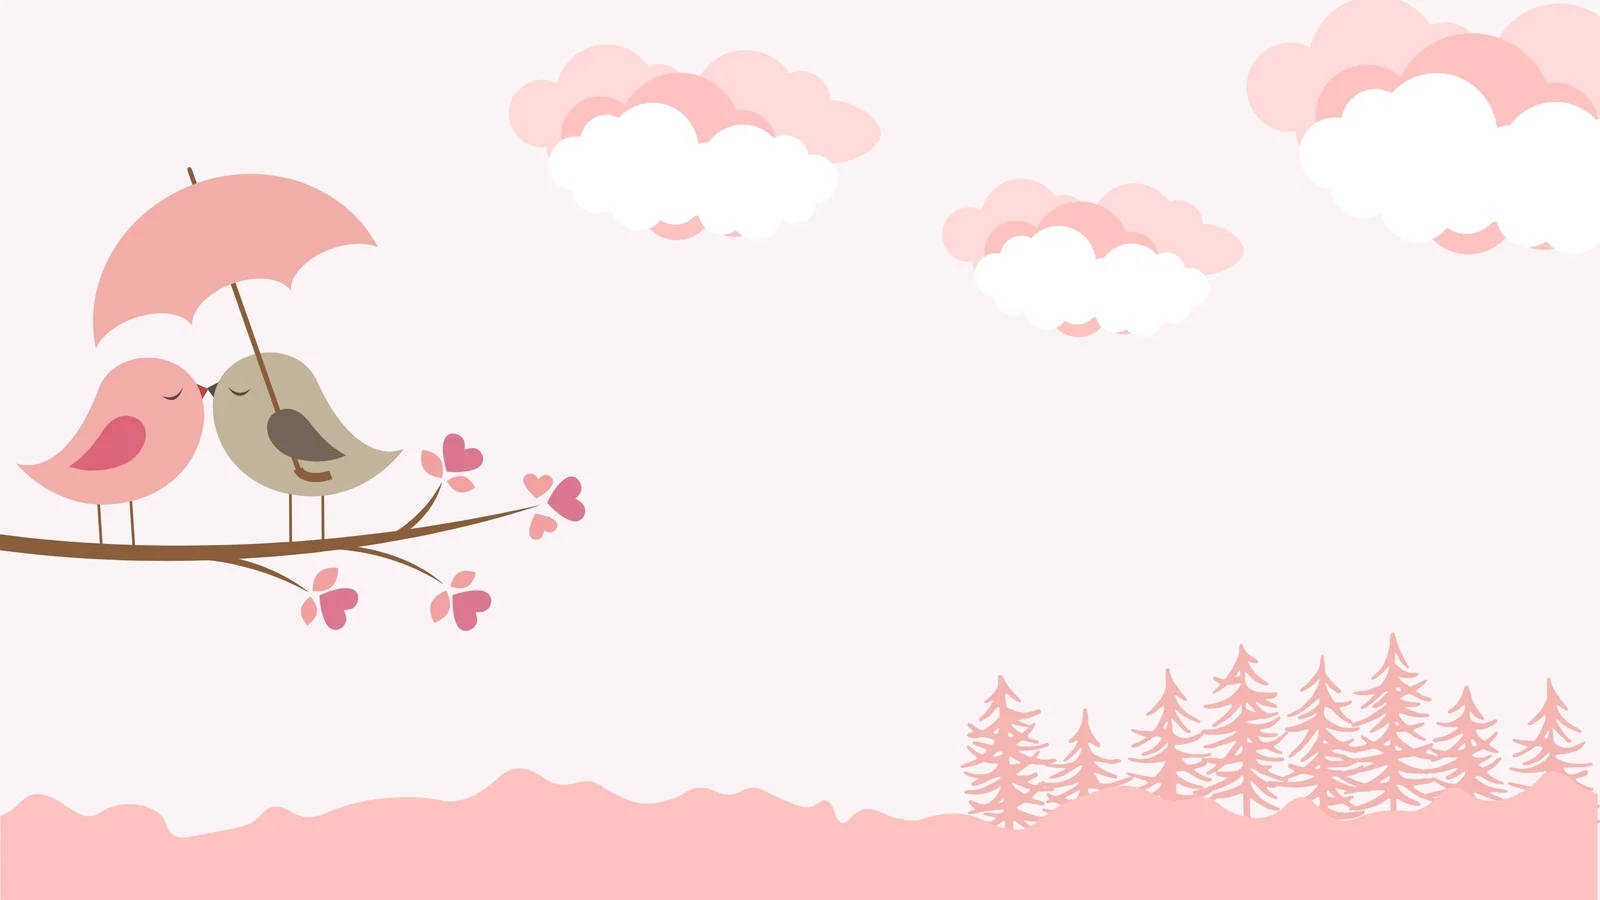 Love Birds In Front Of Pink Forest Wallpaper